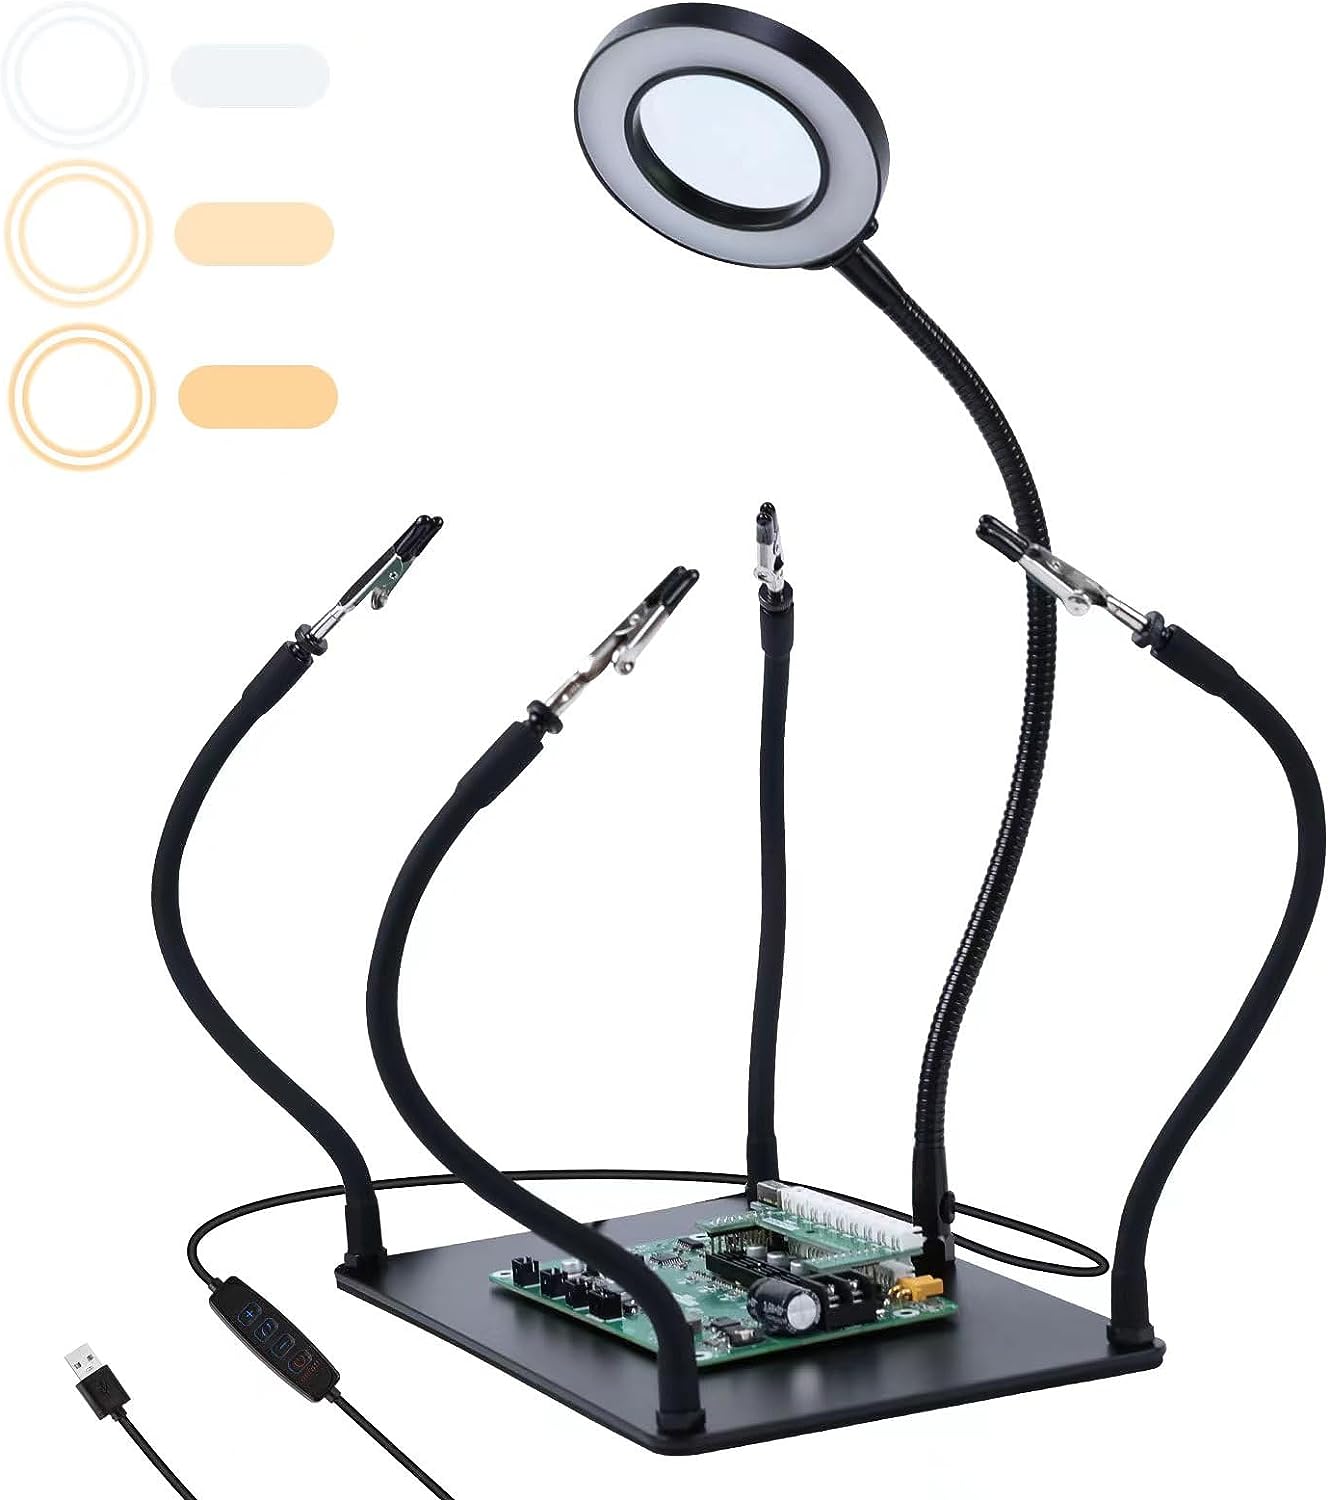 LED Light Hand Magnifier Stand for Welding Solder Tools